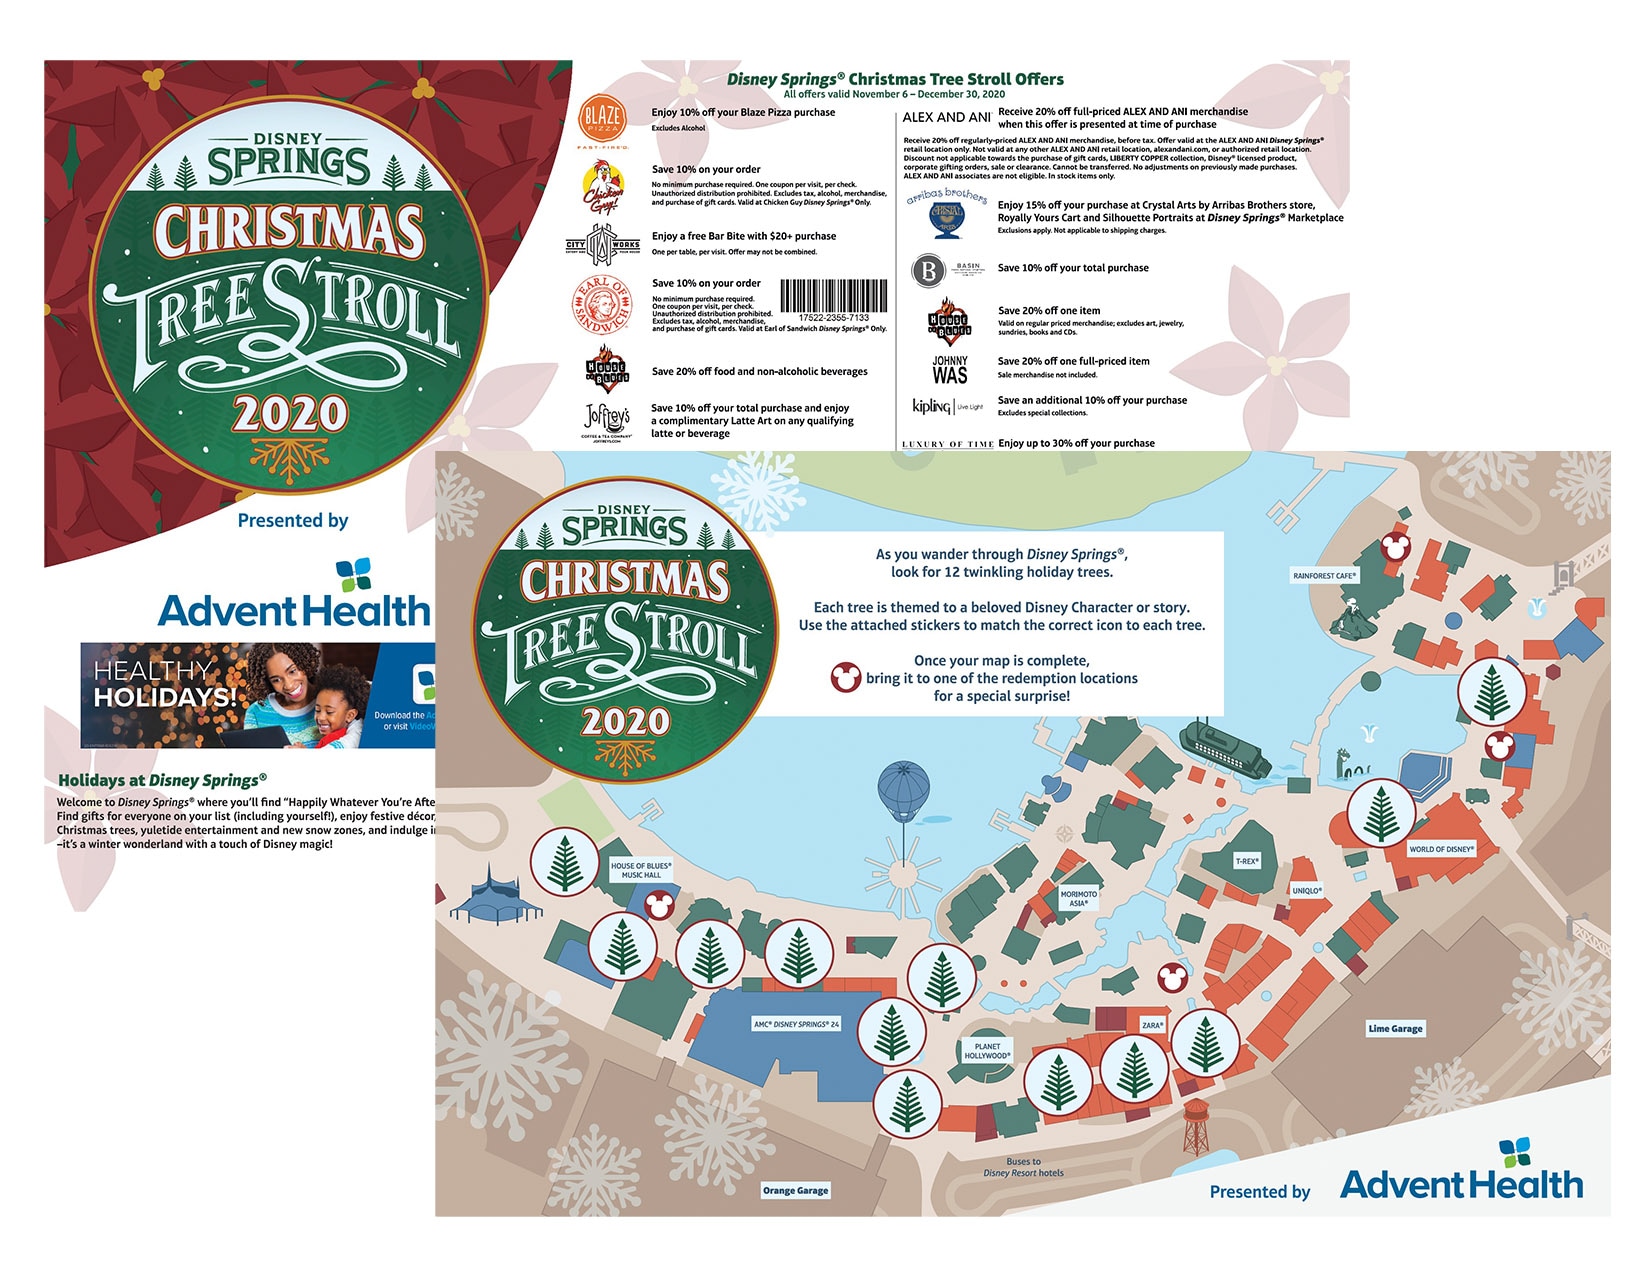 Jolly holiday scavenger hunt that allows you to safely wander and explore the Disney Springs Christmas Tree Stroll presented by AdventHealth